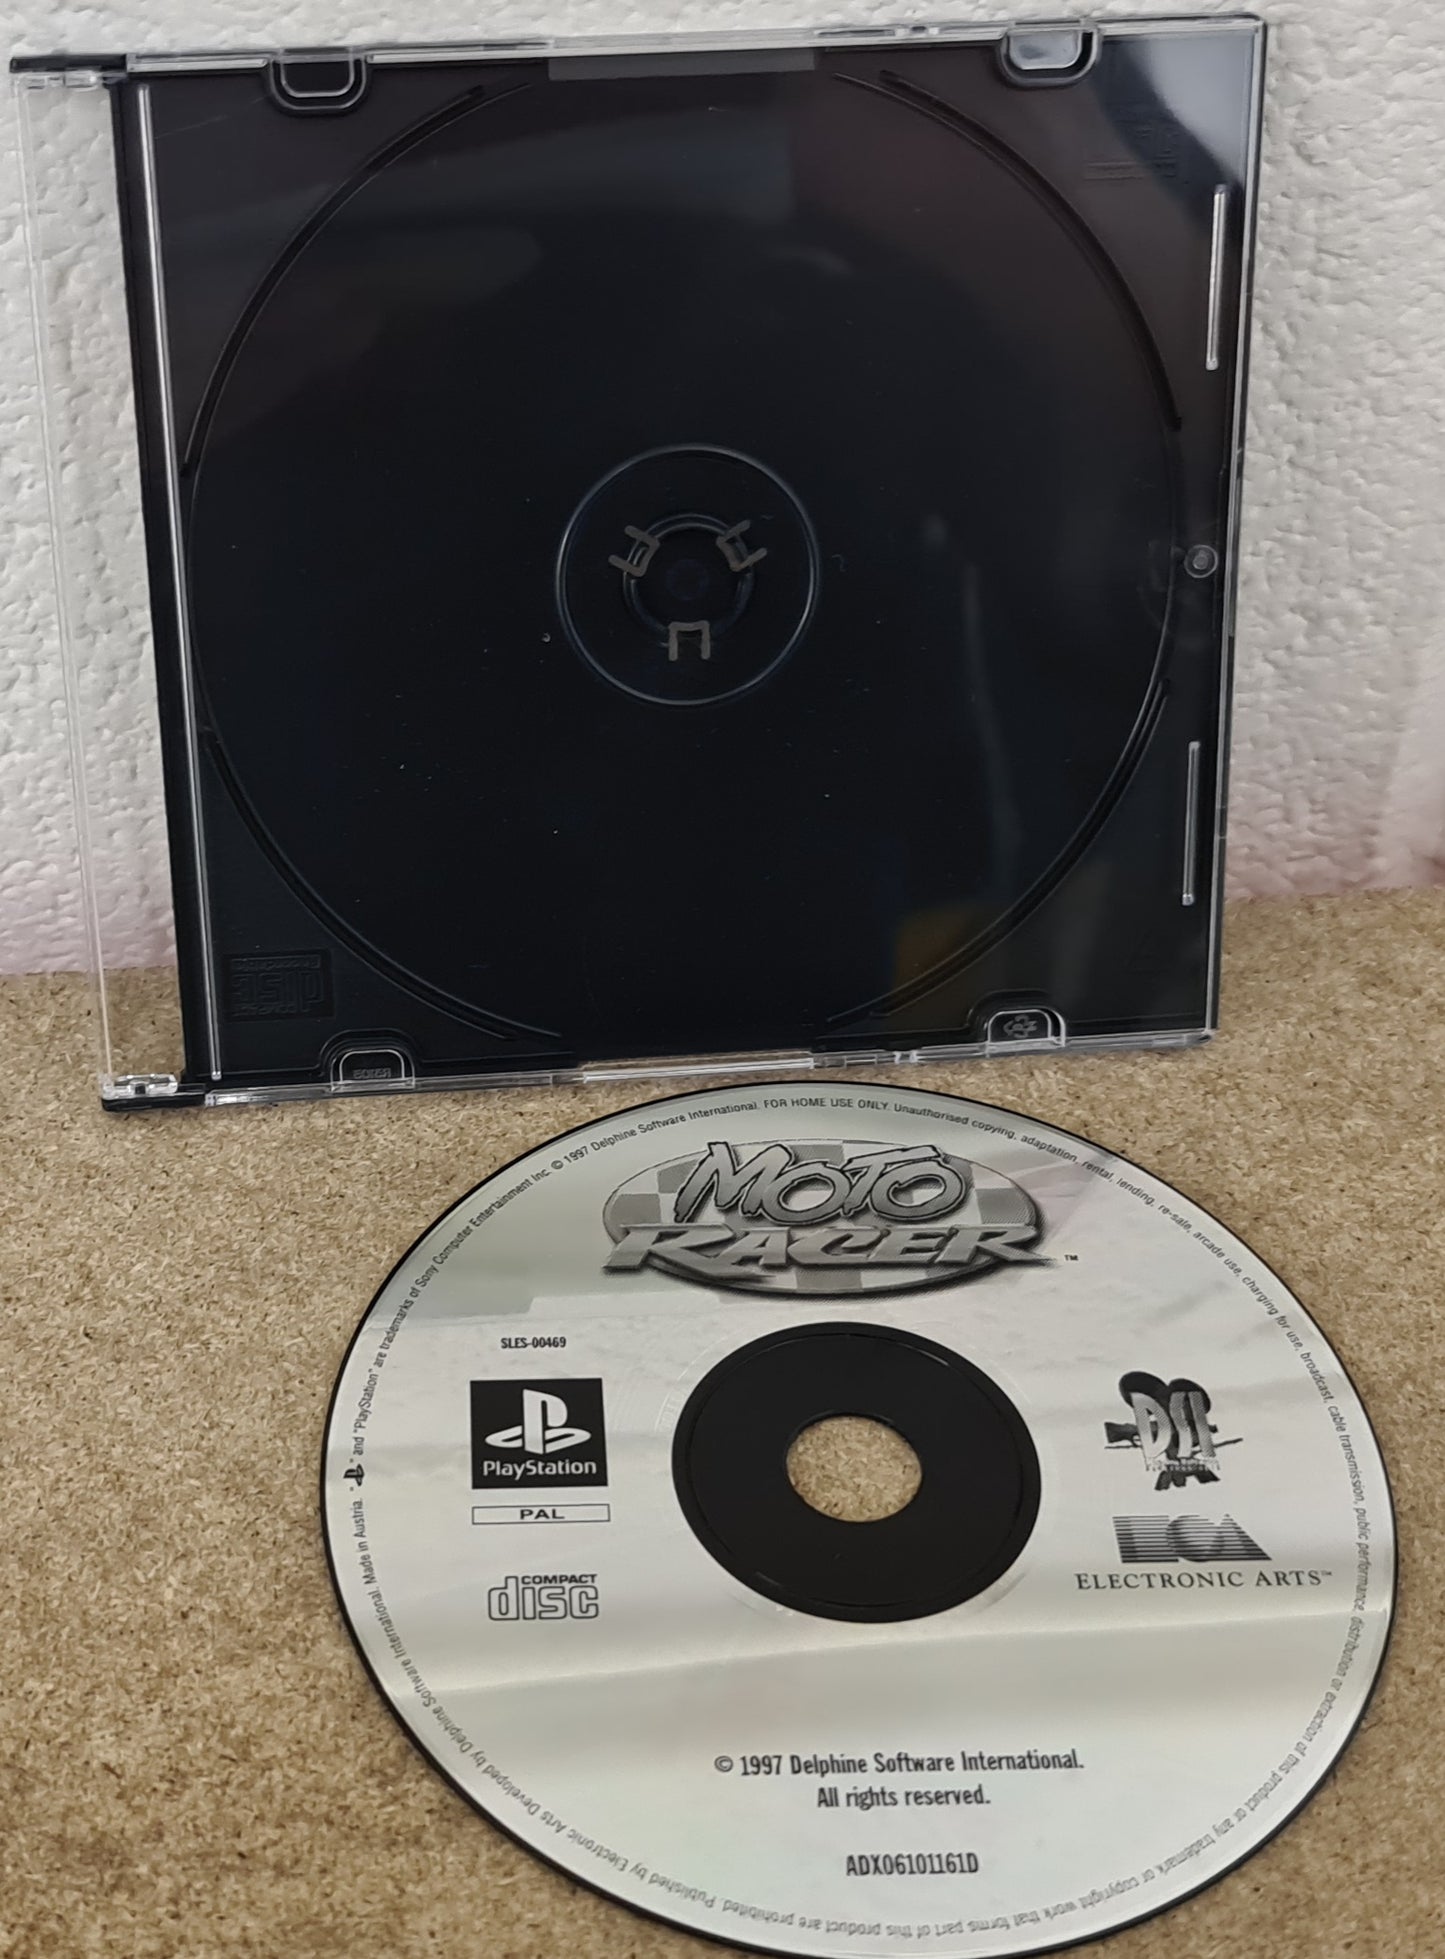 Moto Racer Sony Playstation 1 (PS1) Game Disc Only